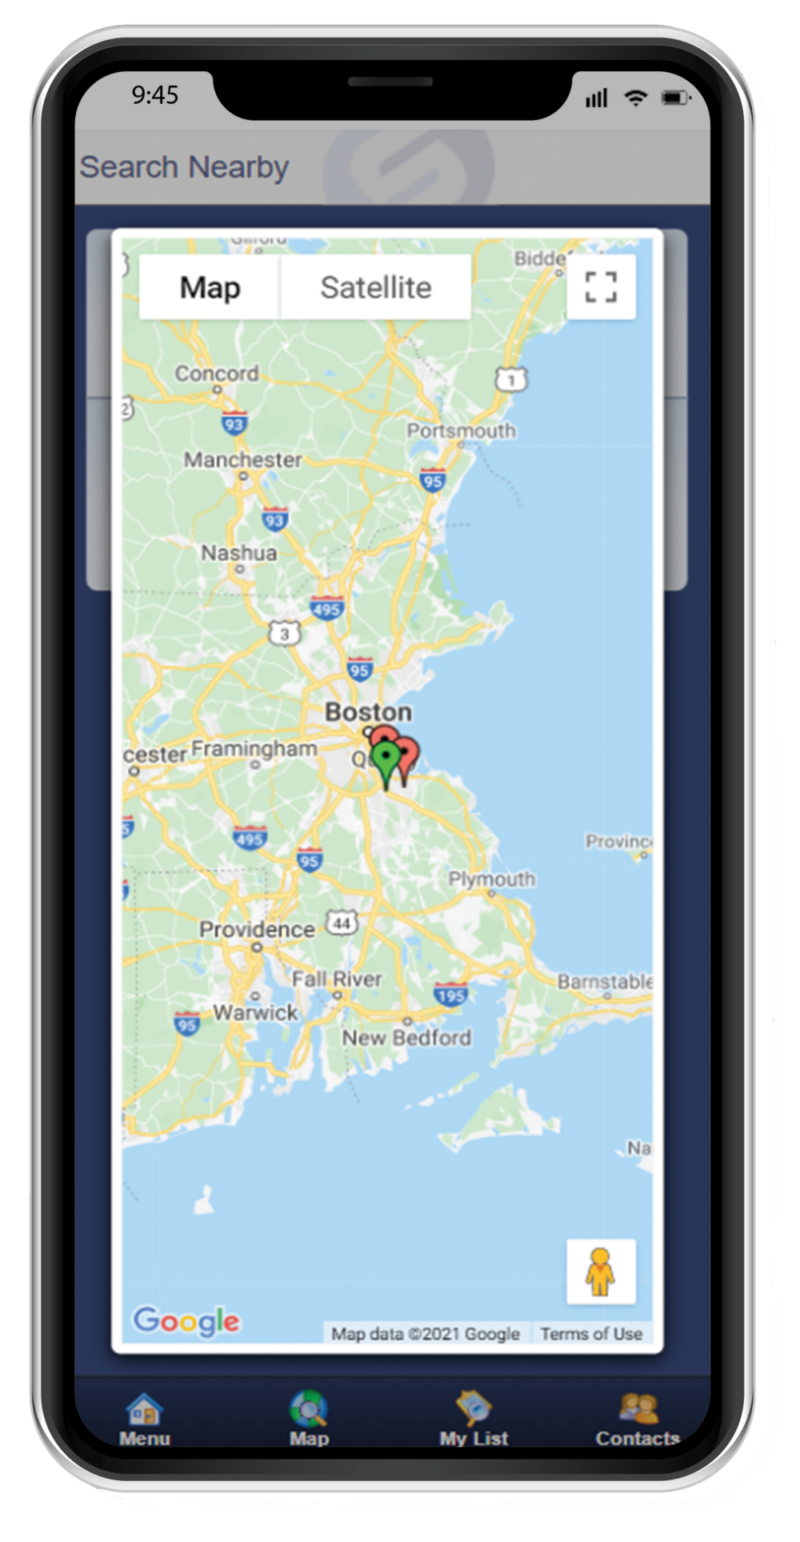 Mobile CRM app mapping and navigation